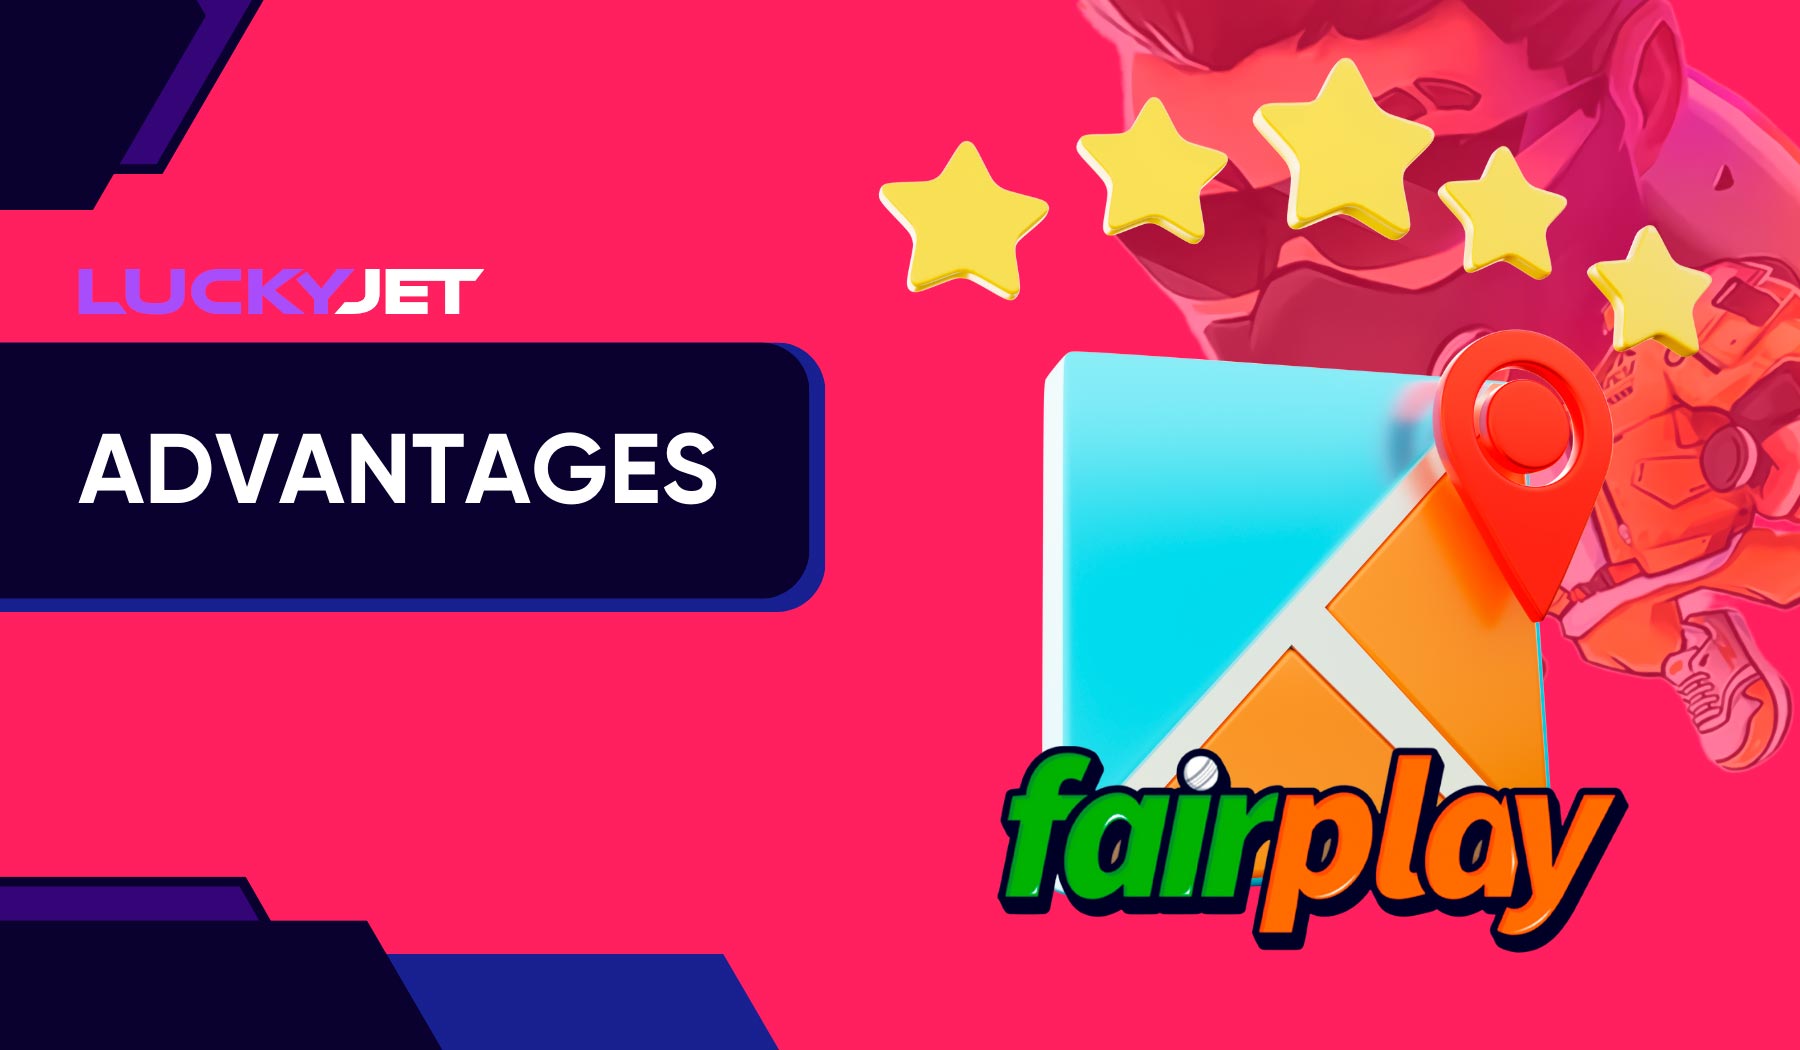 What are the Benefits of Fairplay Lucky Jet